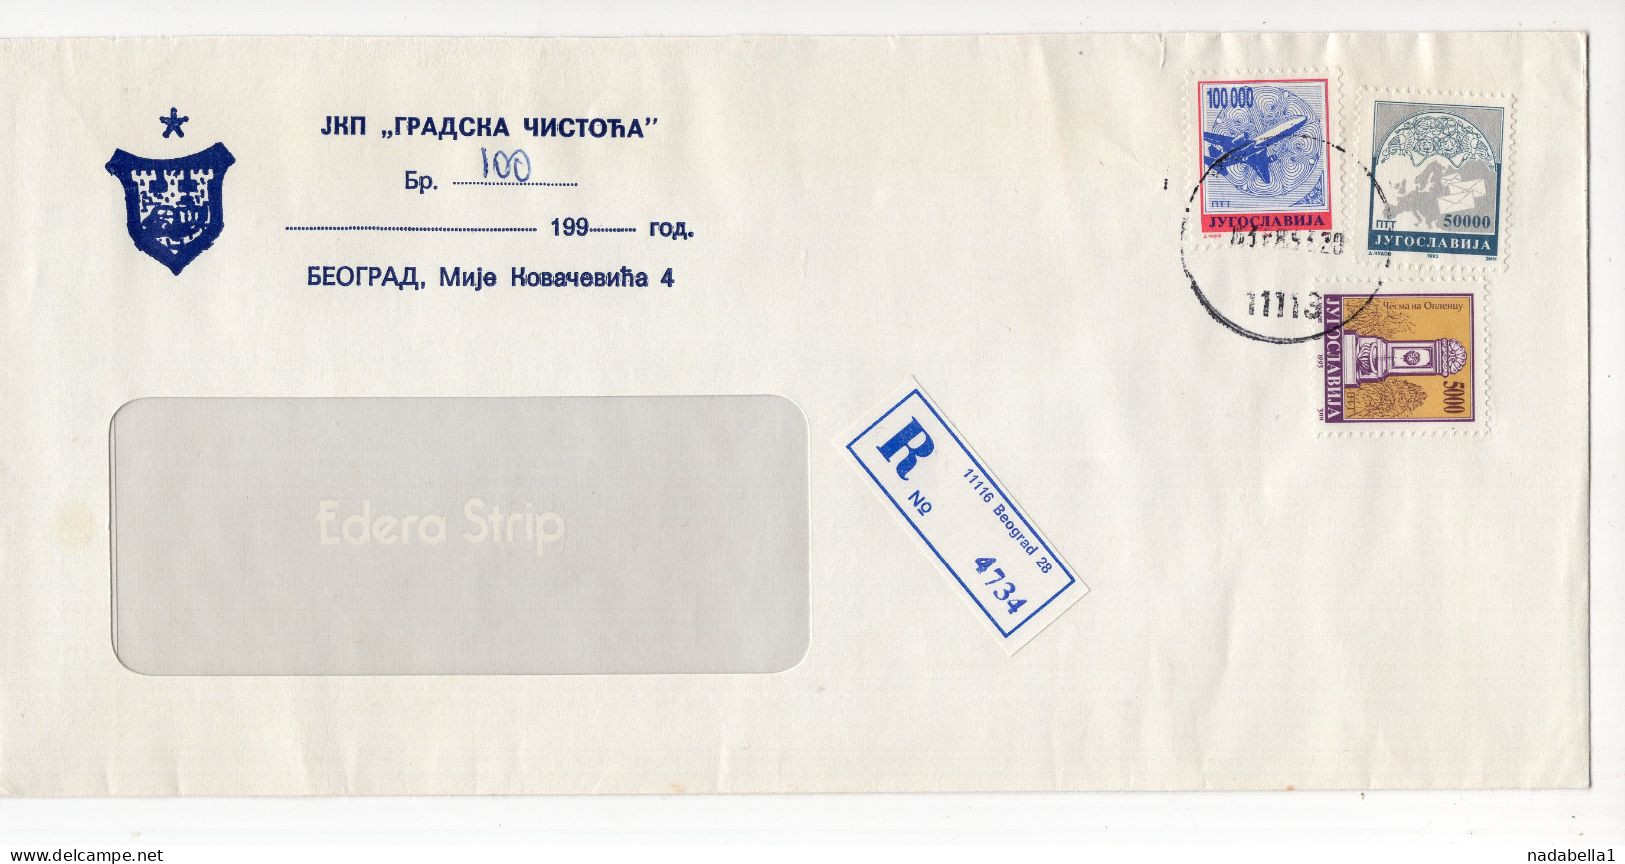 1993. YUGOSLAVIA,SERBIA,BELGRADE,RECORDED COVER,INFLATIONARY MAIL,155 000 DIN FRANKING - Covers & Documents